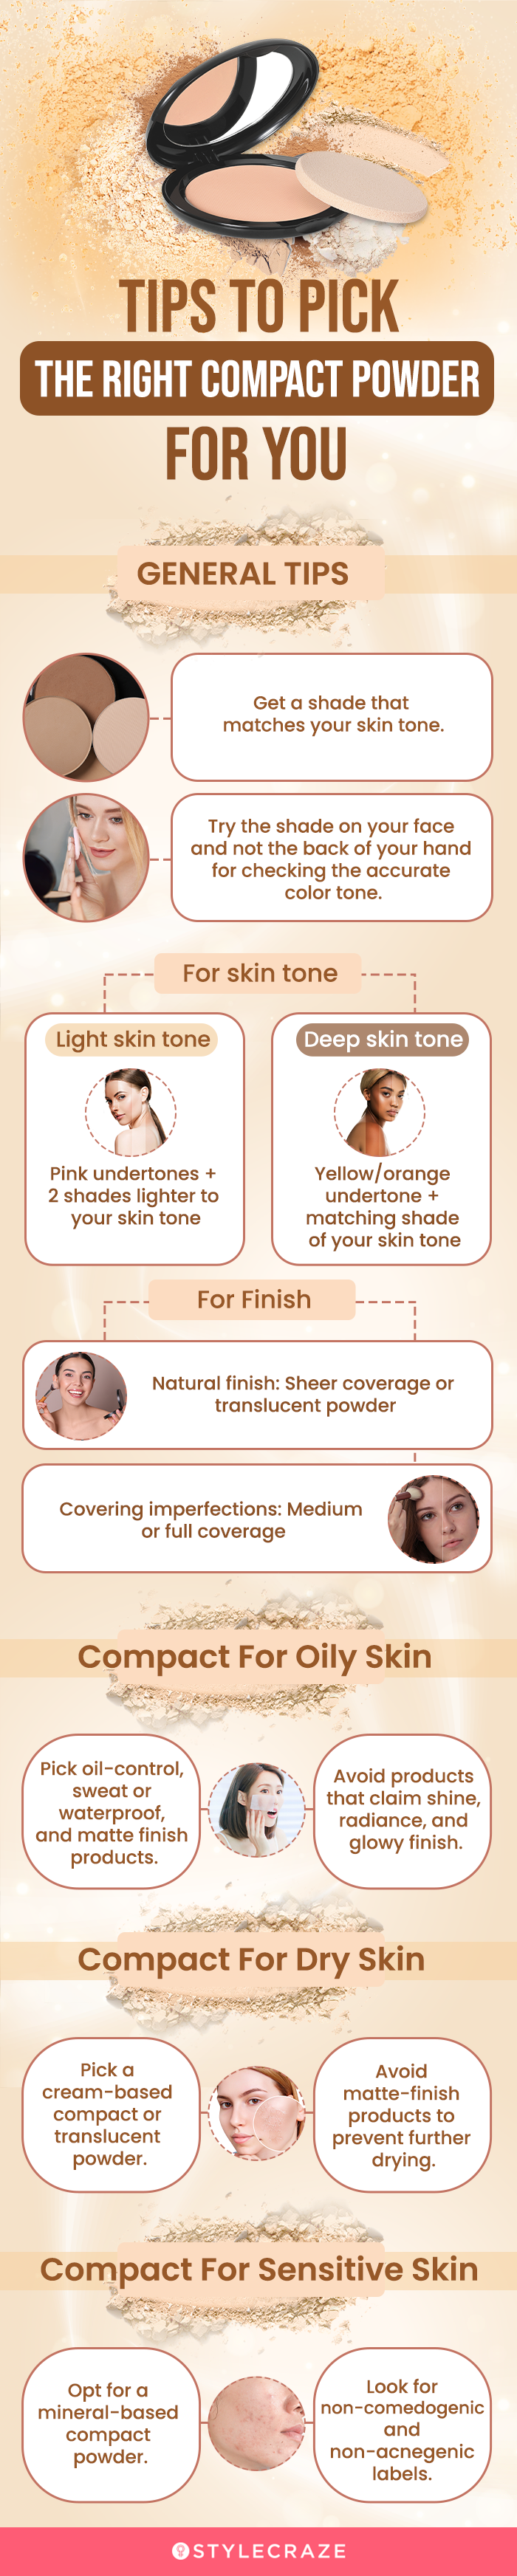 tips to pick the right compact powder for you (infographic)